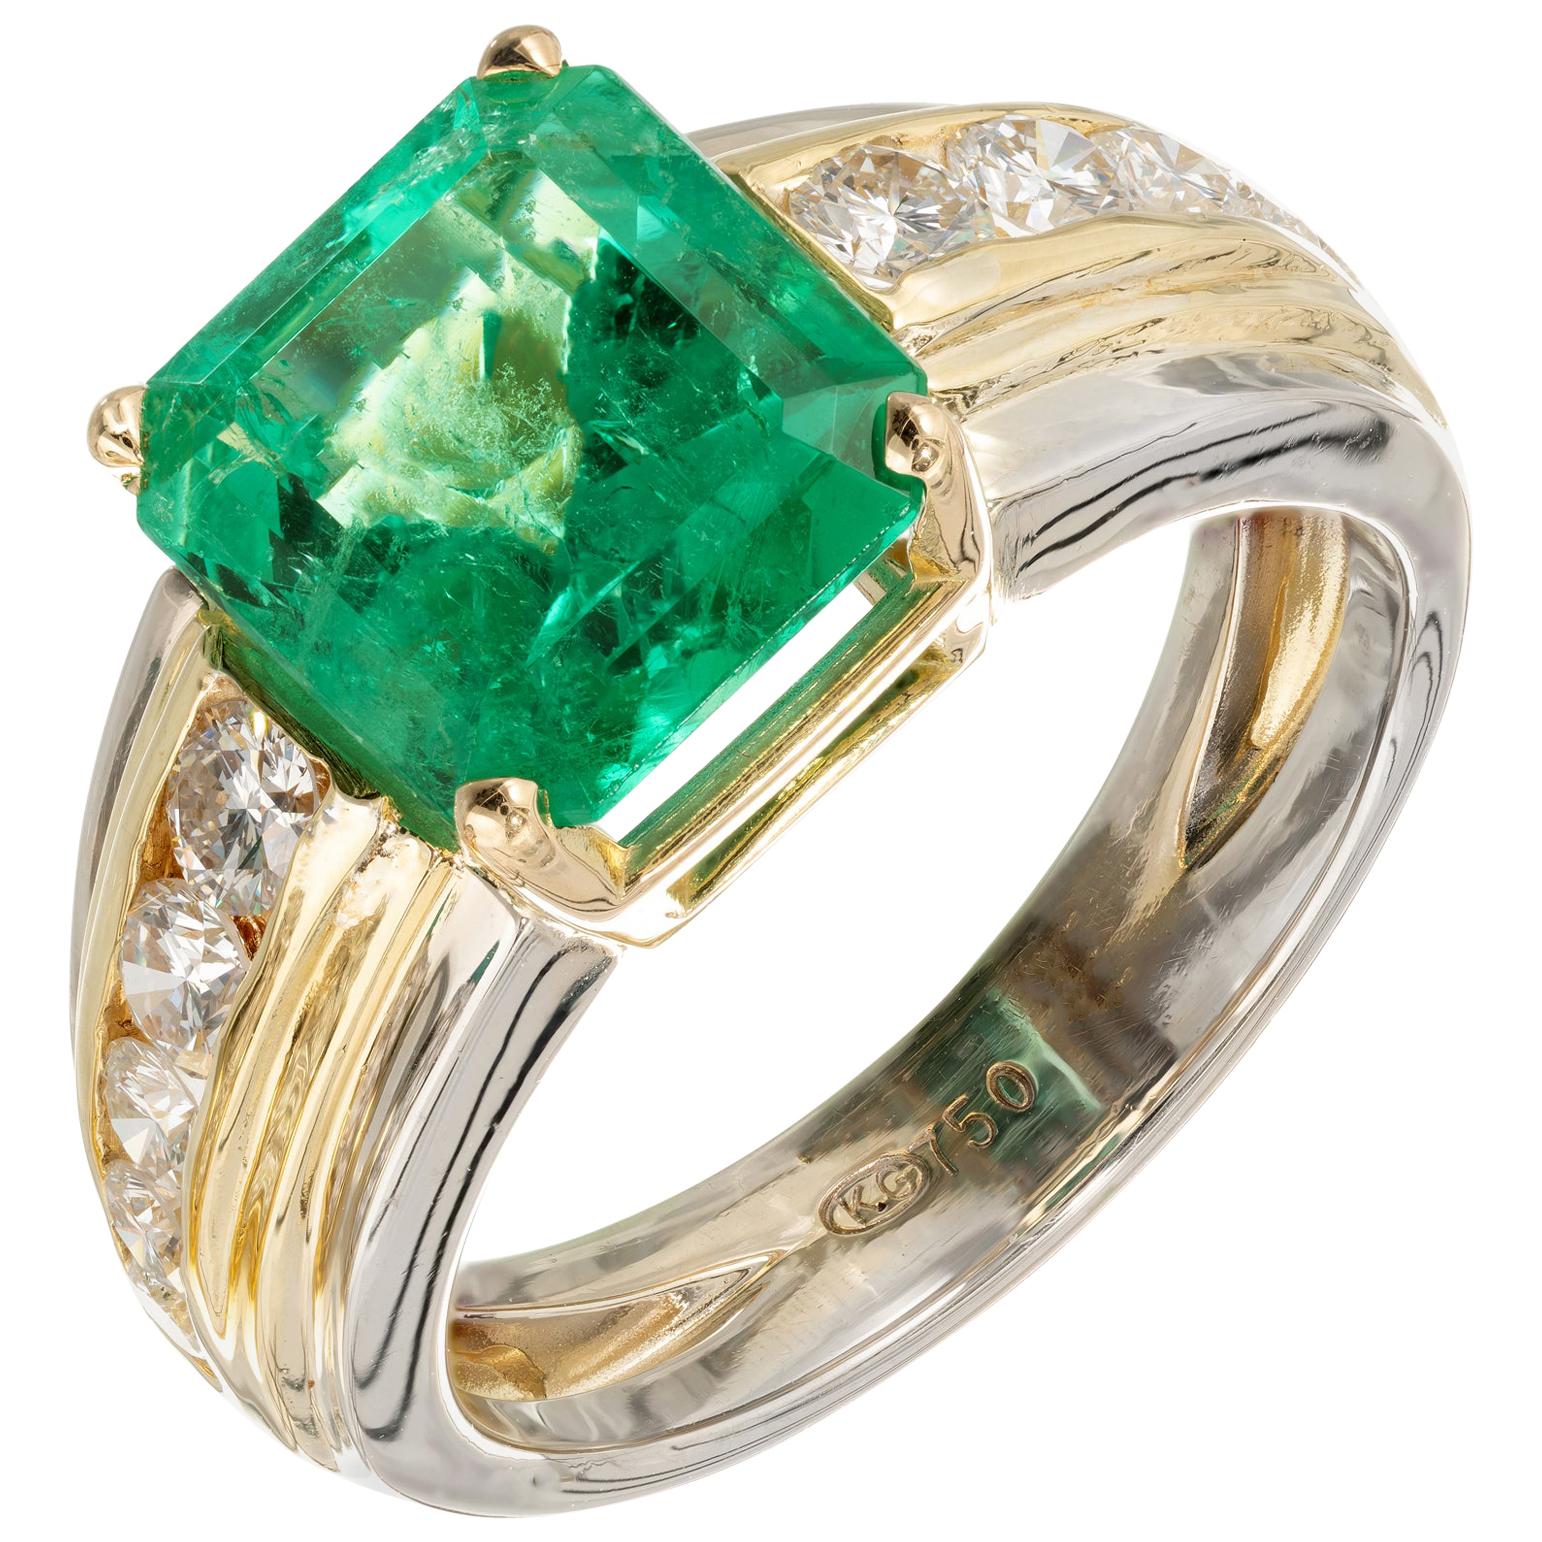 GIA Certified 4.02 Carat Colombian Emerald Diamond Yellow White Gold Ring